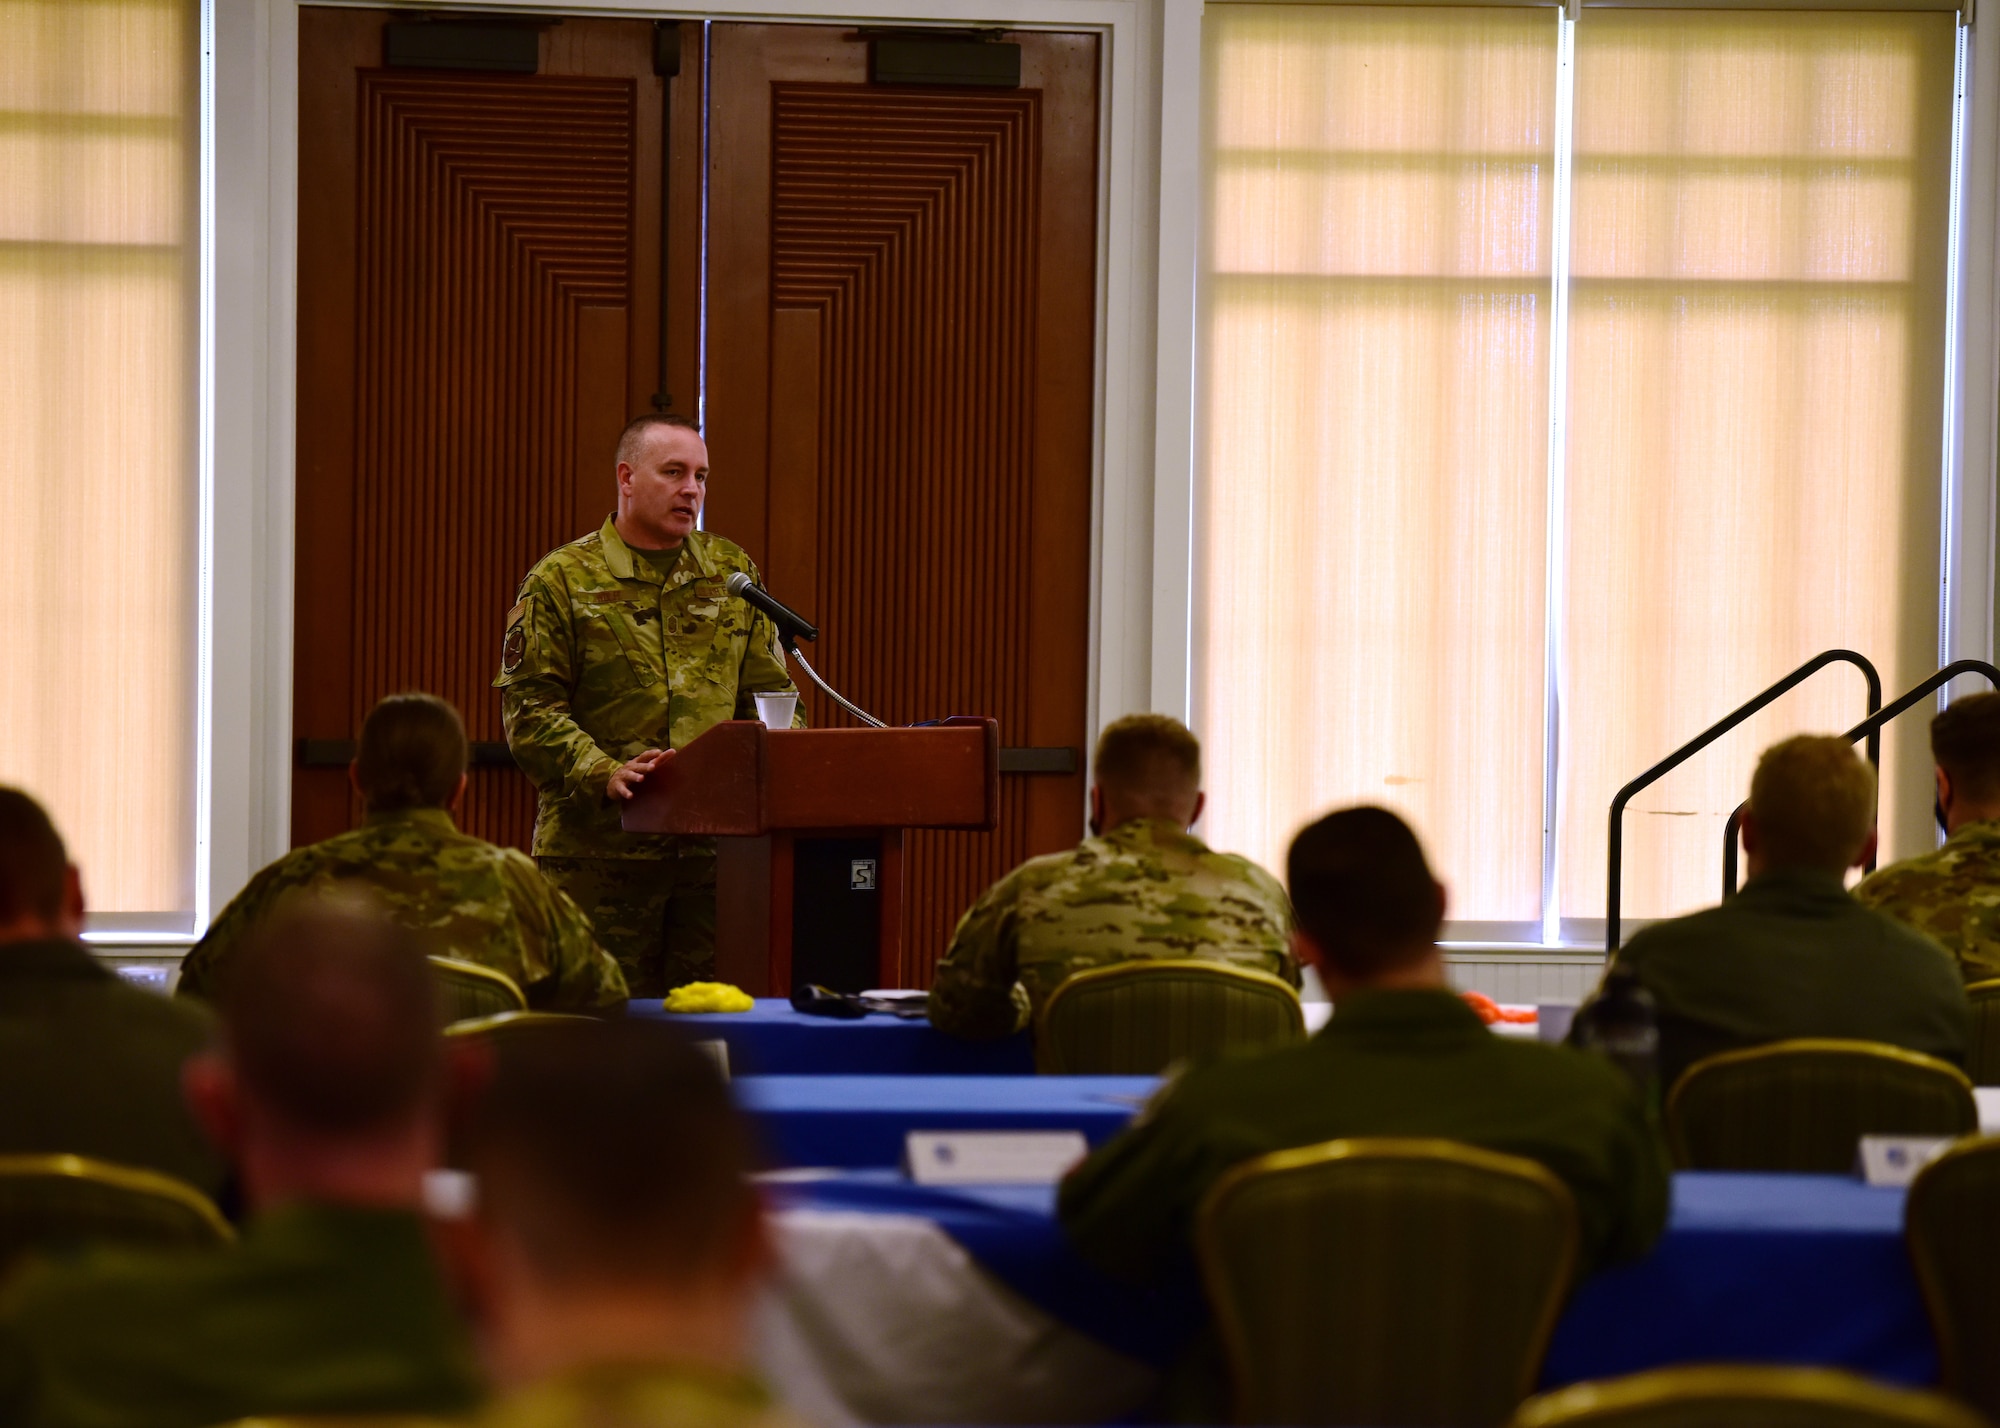 Photo of U.S. Air Force chief master sergeant briefing commanders.